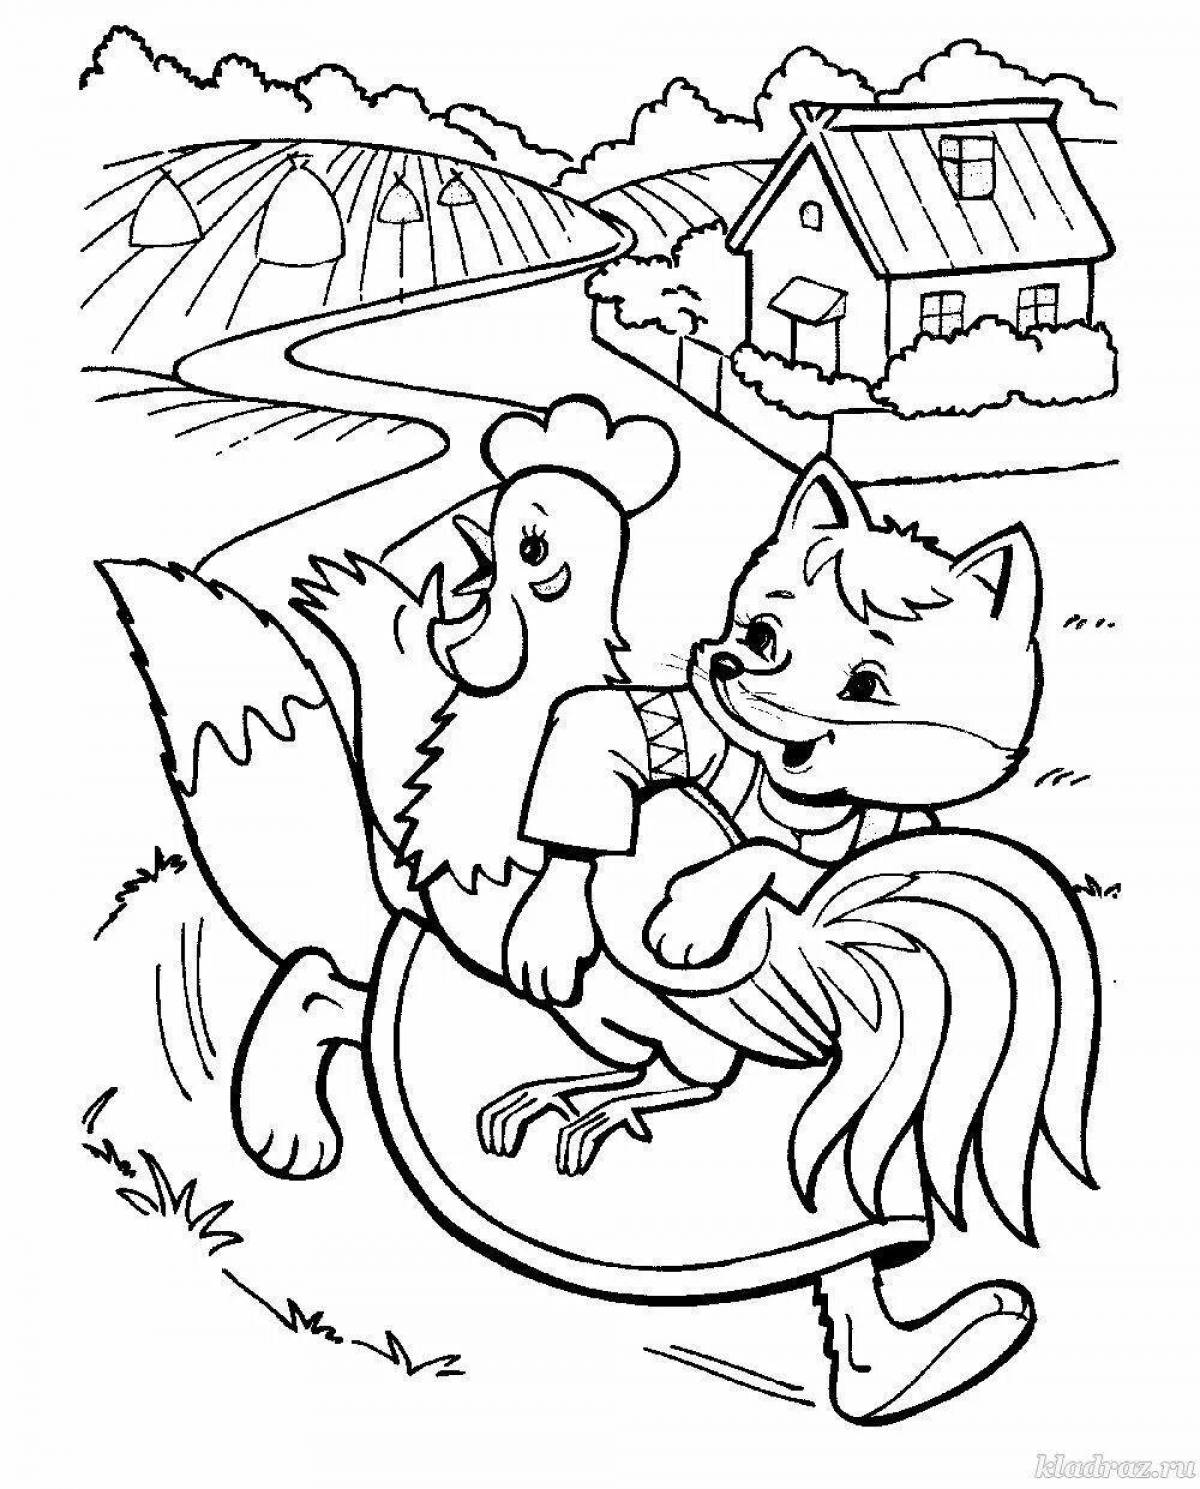 Cat cock and fox #7